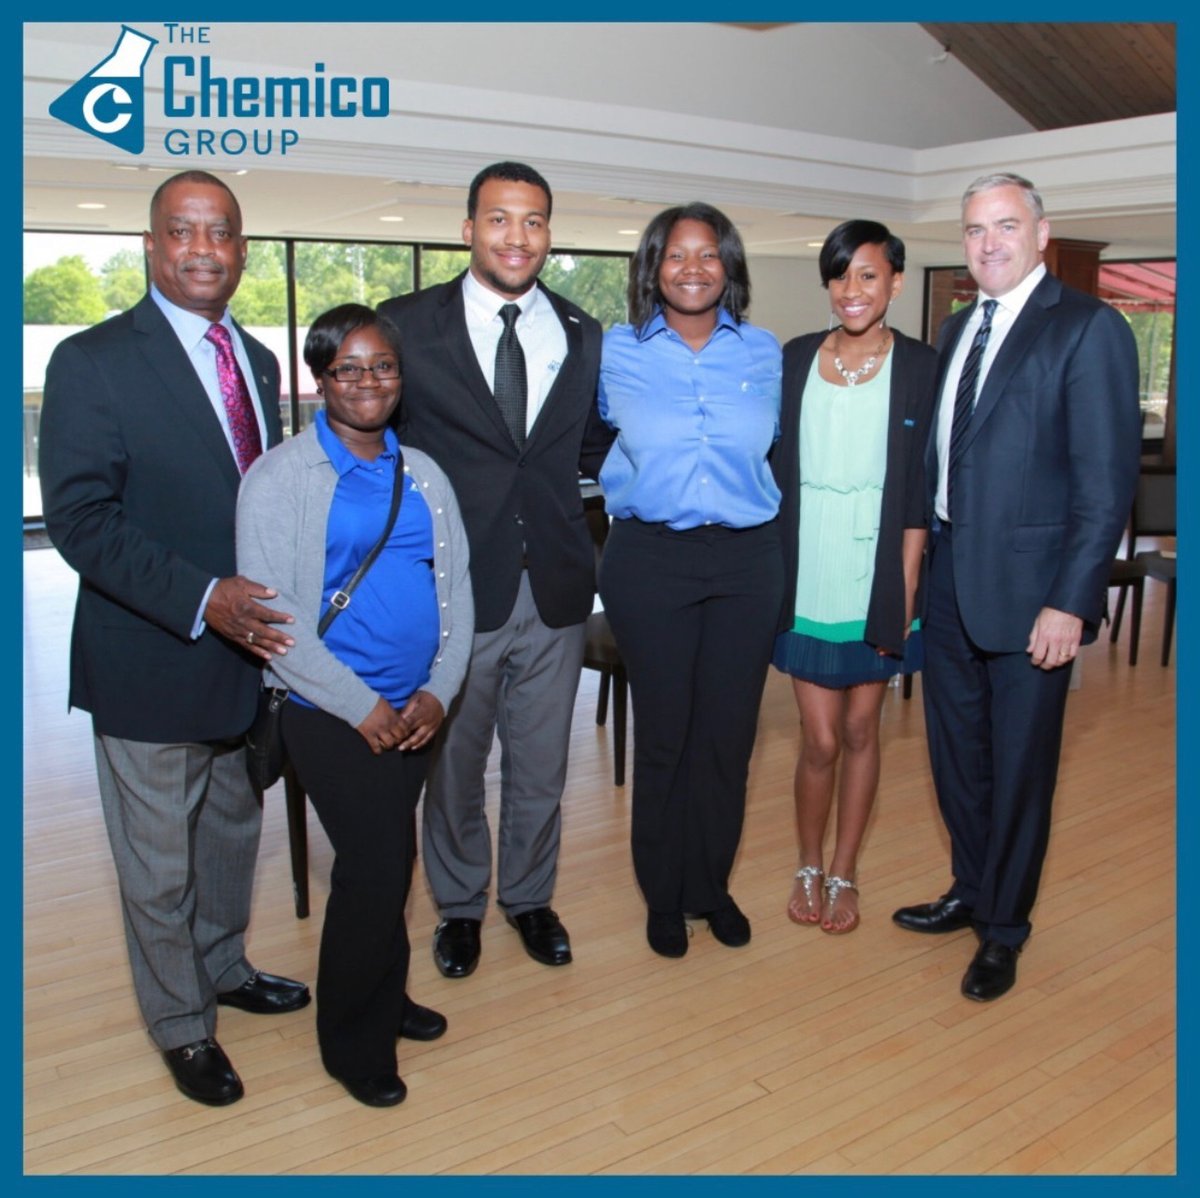 It’s #NationalMentorMonth! At Chemico, we believe in the value of #mentorship and the power to make a difference in the lives, companies and communities where we operate. We’re committed to inspiring the next generation of leaders in #STEM industries. #MentorshipMonday